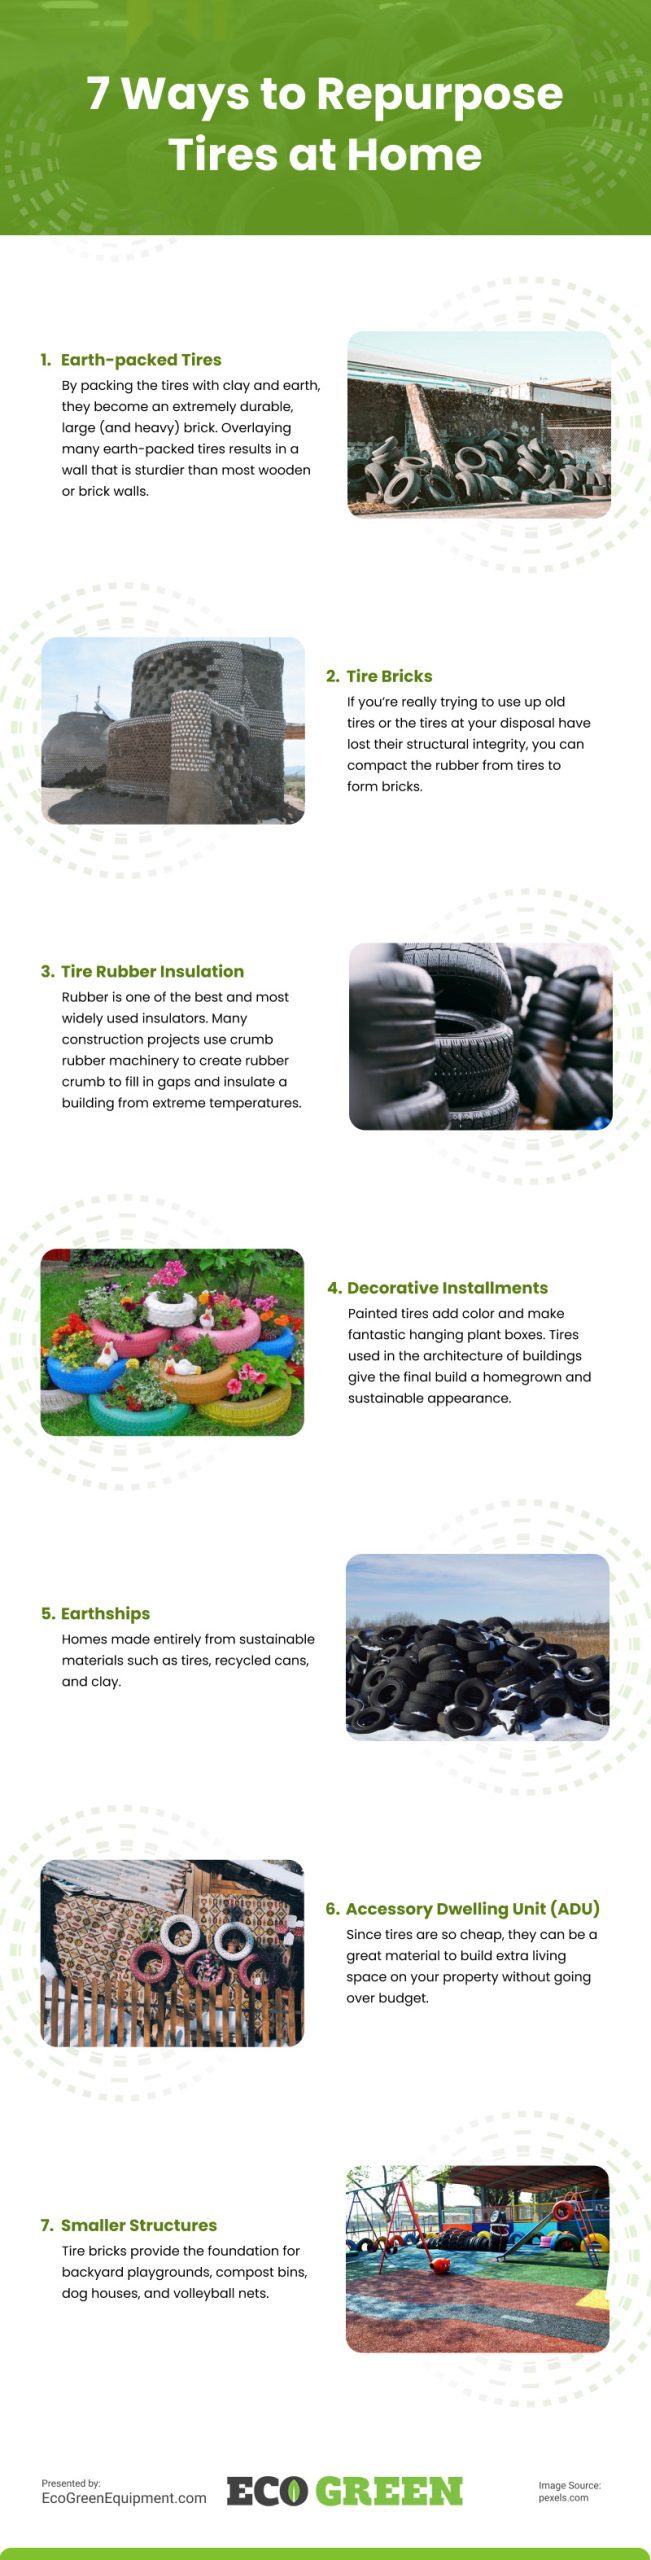 7 Ways To Repurpose Tires at Home Infographic